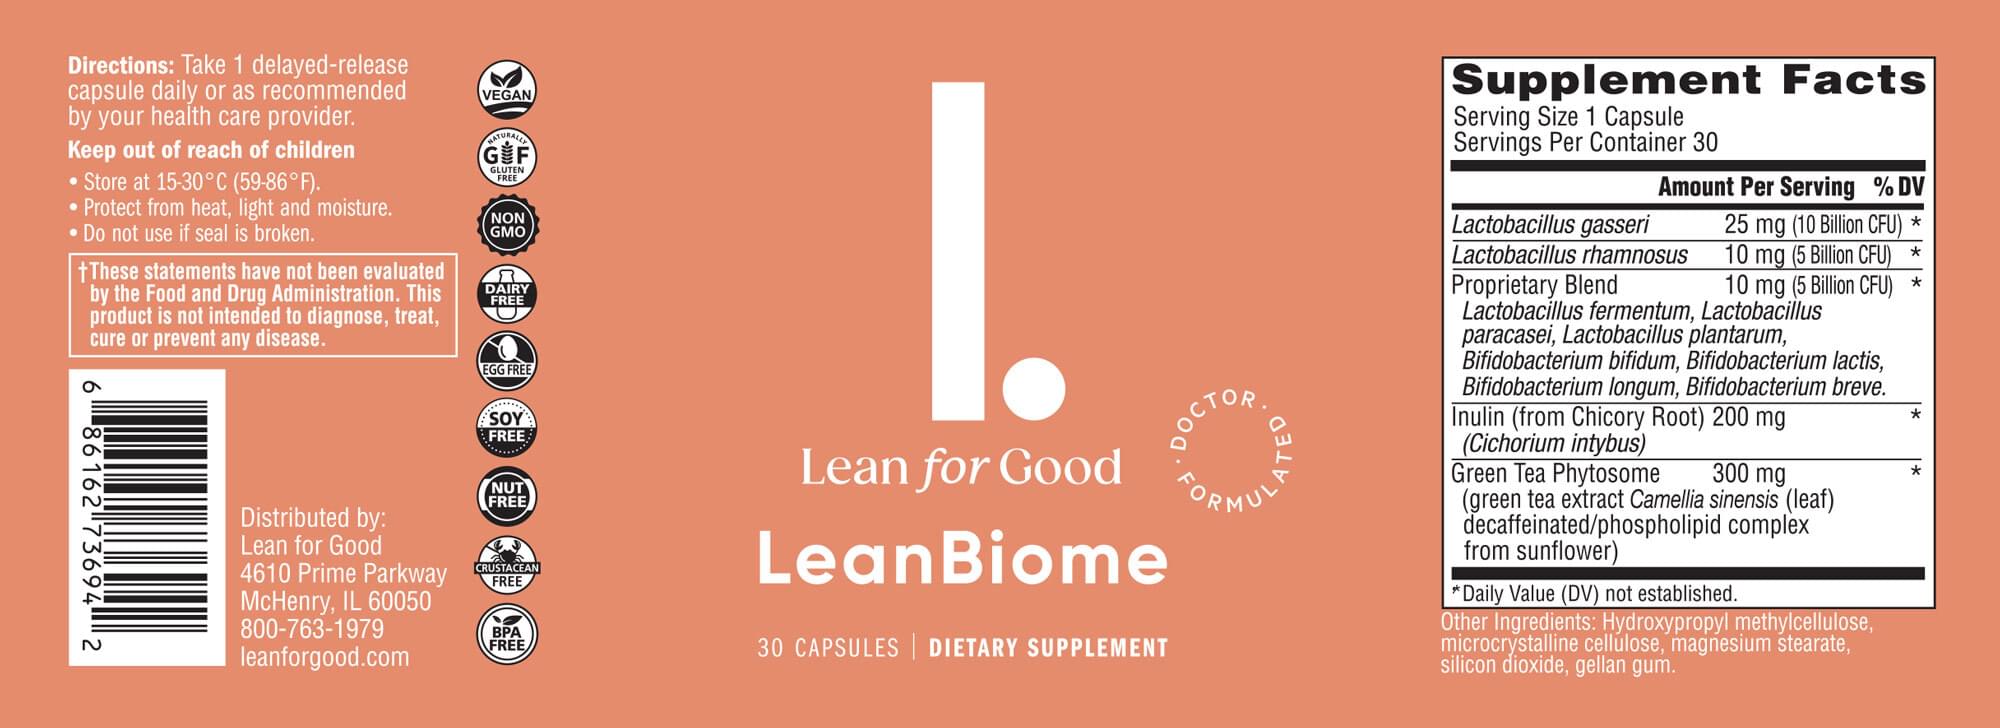 LeanBiome Supplement Facts